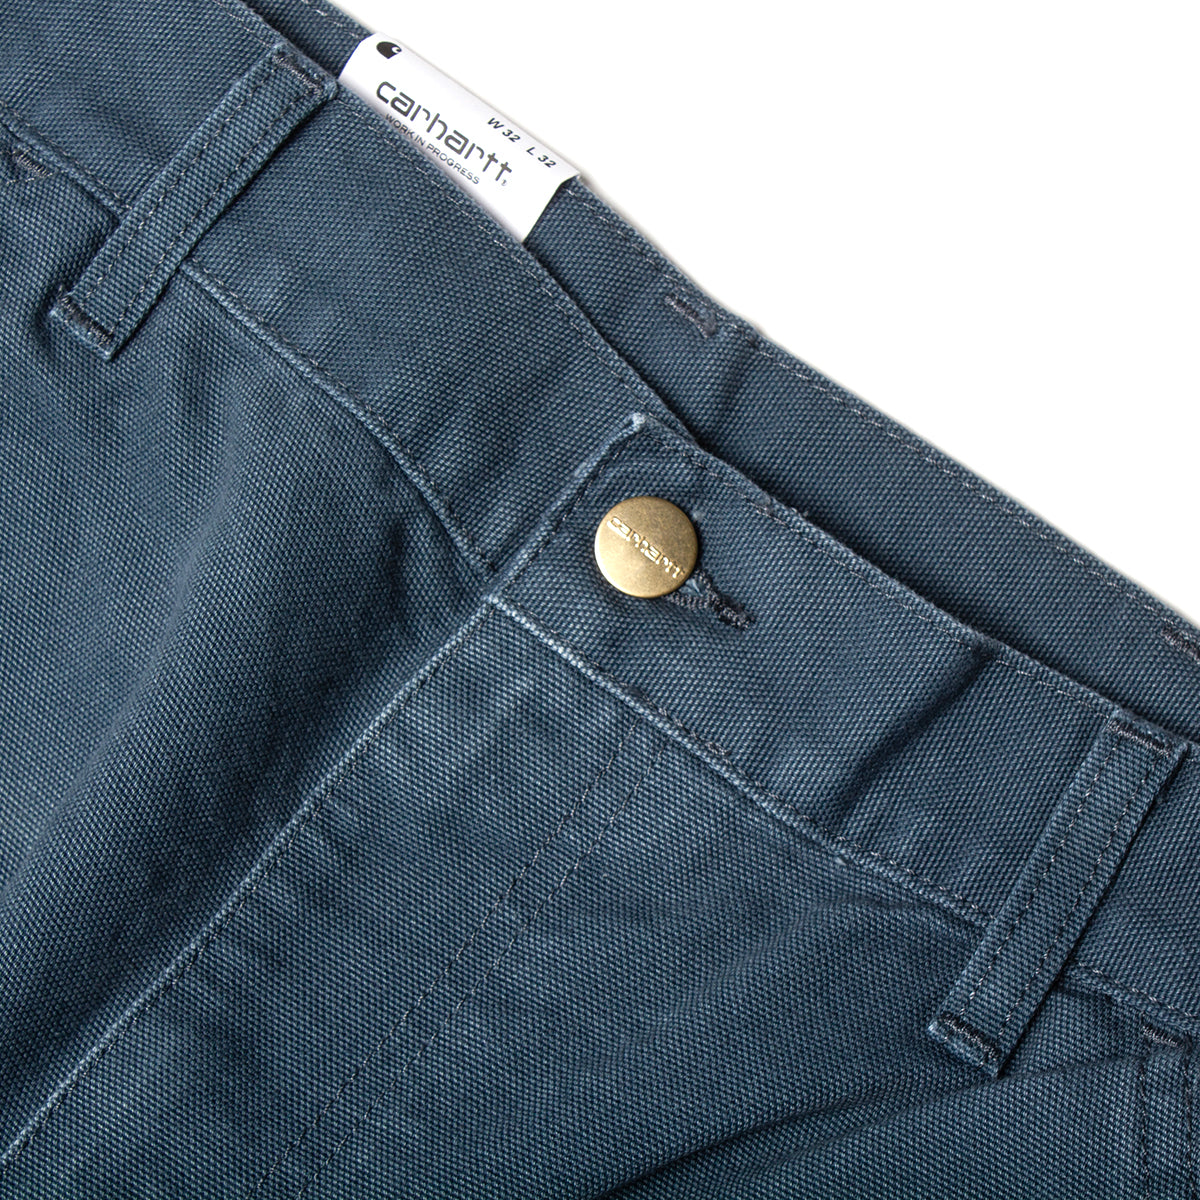 Carhartt WIP Double Knee Pant Style # I031501-0R Color : Ore (Aged Canvas)